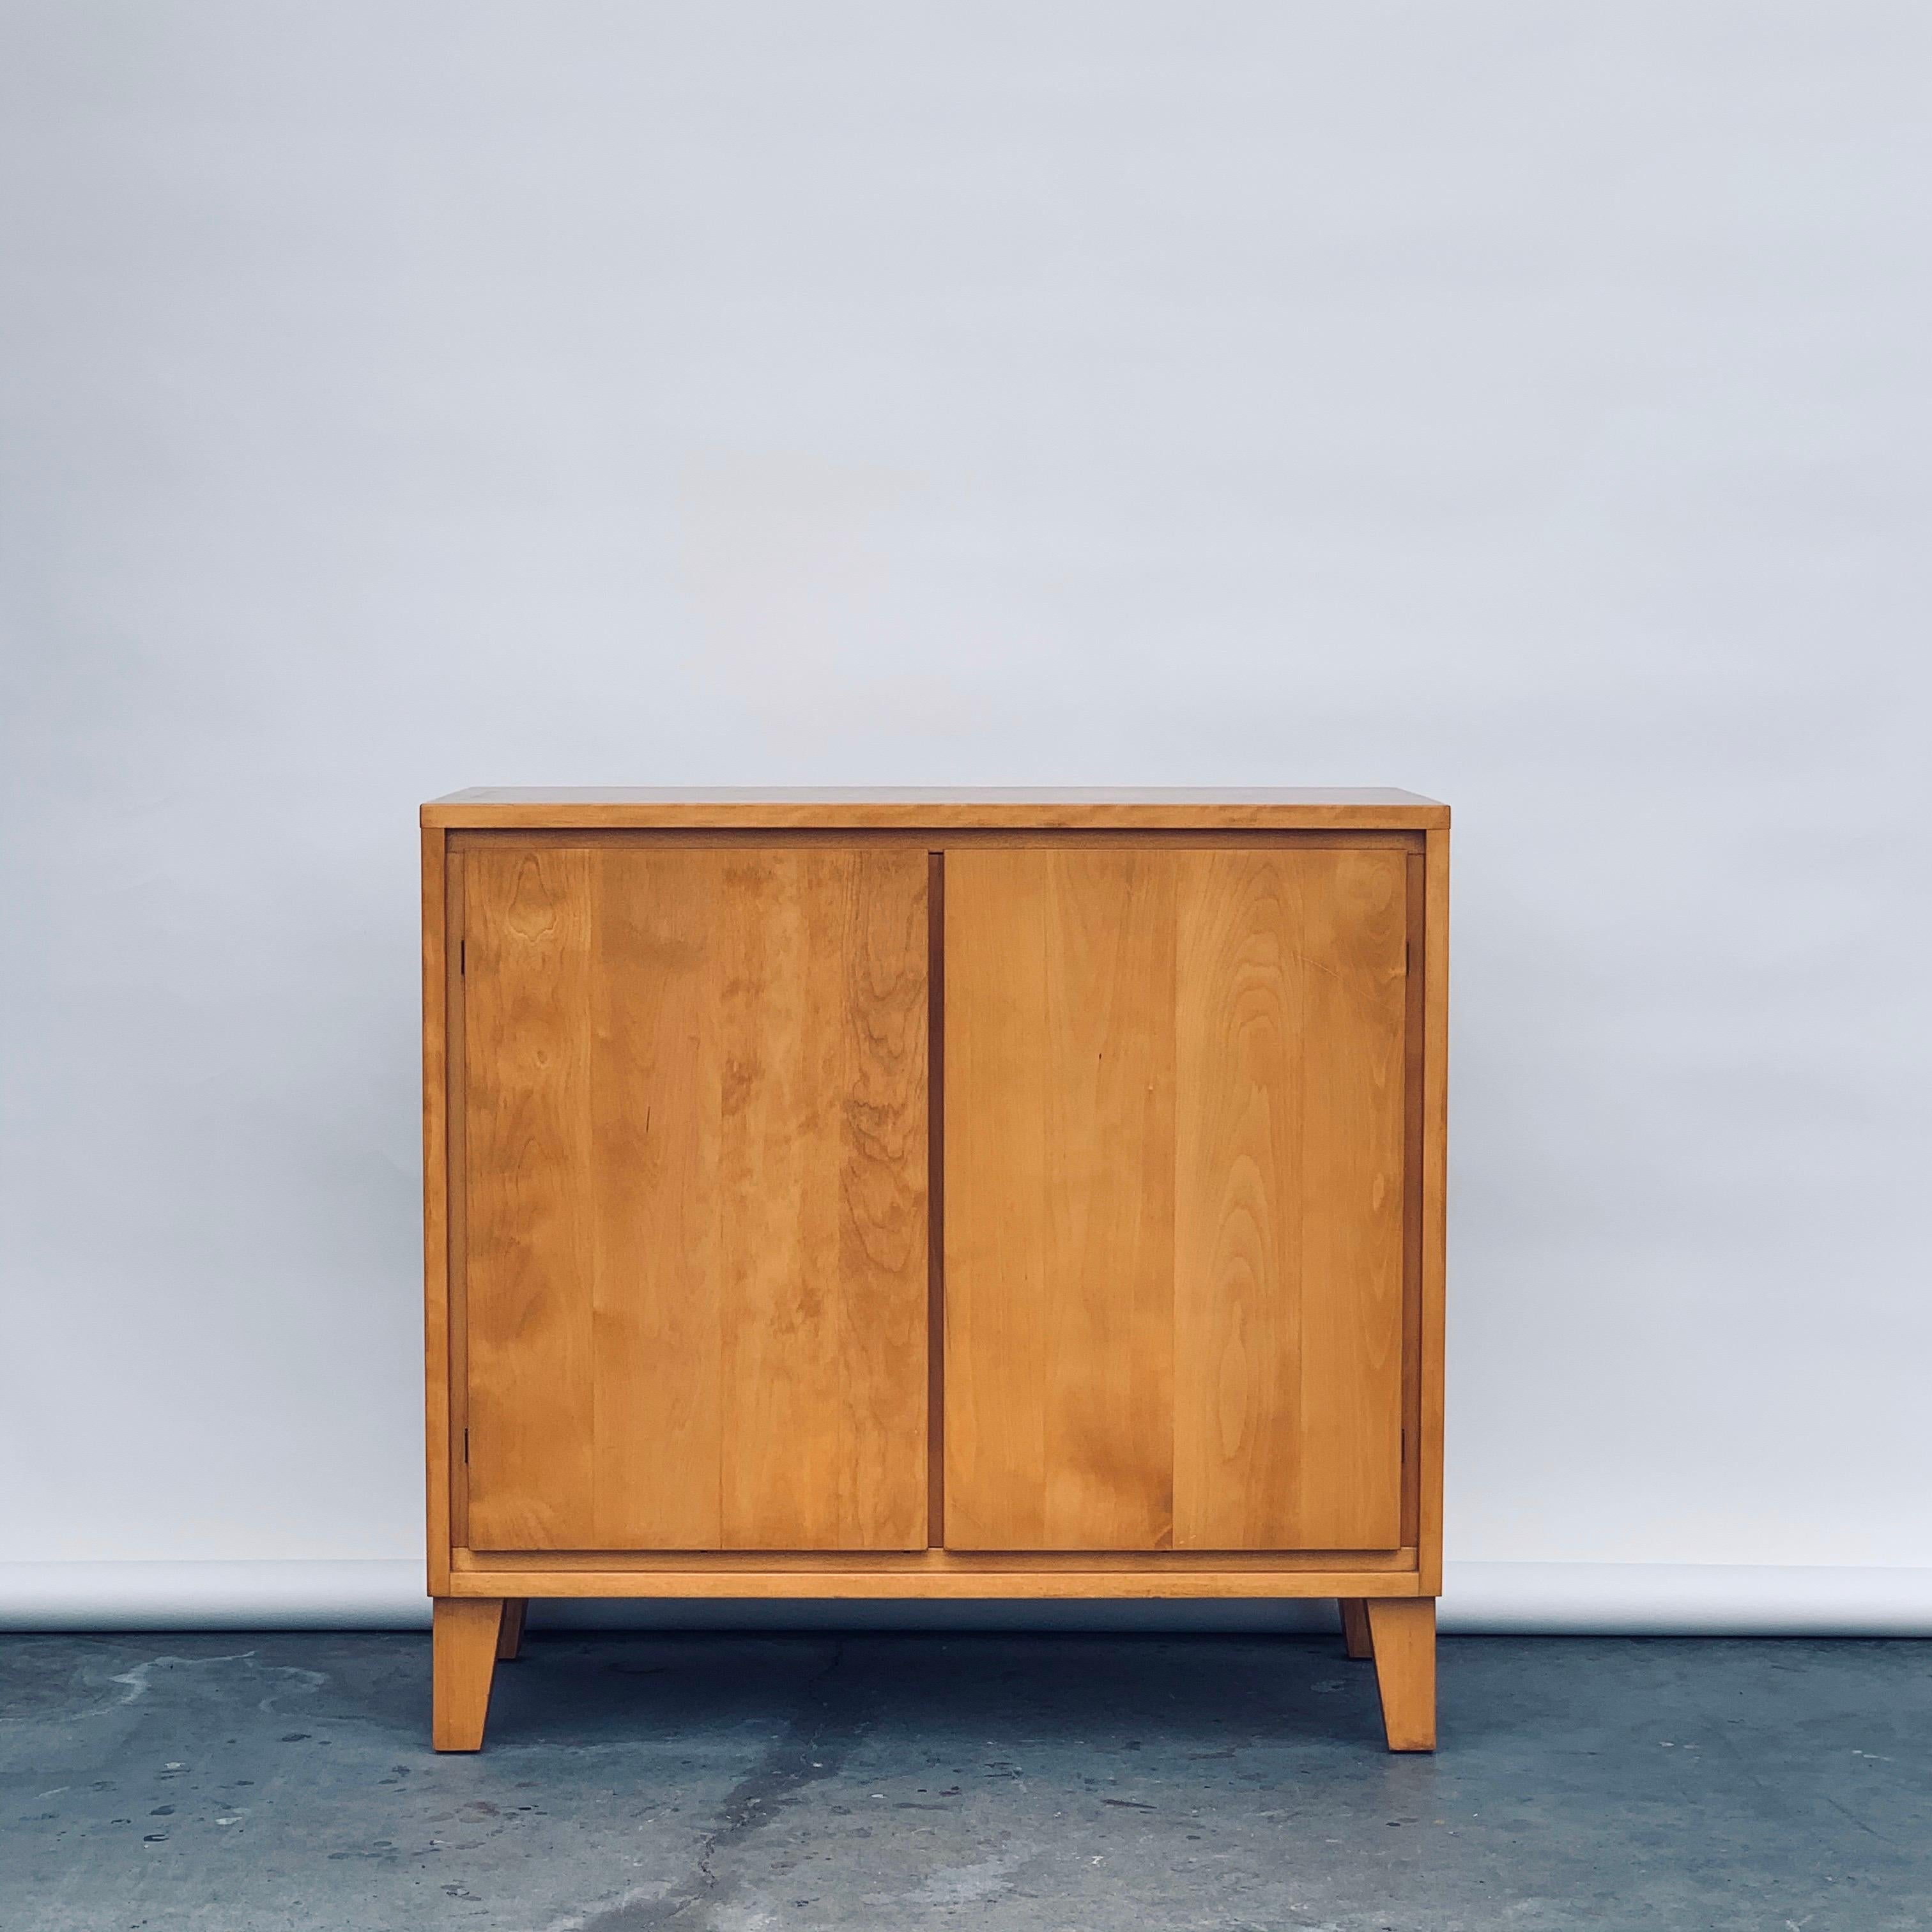 Vintage Conant ball credenza or record cabinet by Leslie Diamond in pristine condition.

This simple, understated record cabinet was designed by Leslie Diamond for the Modern Mates Collection manufactured by Conant Ball of Massachusetts, circa